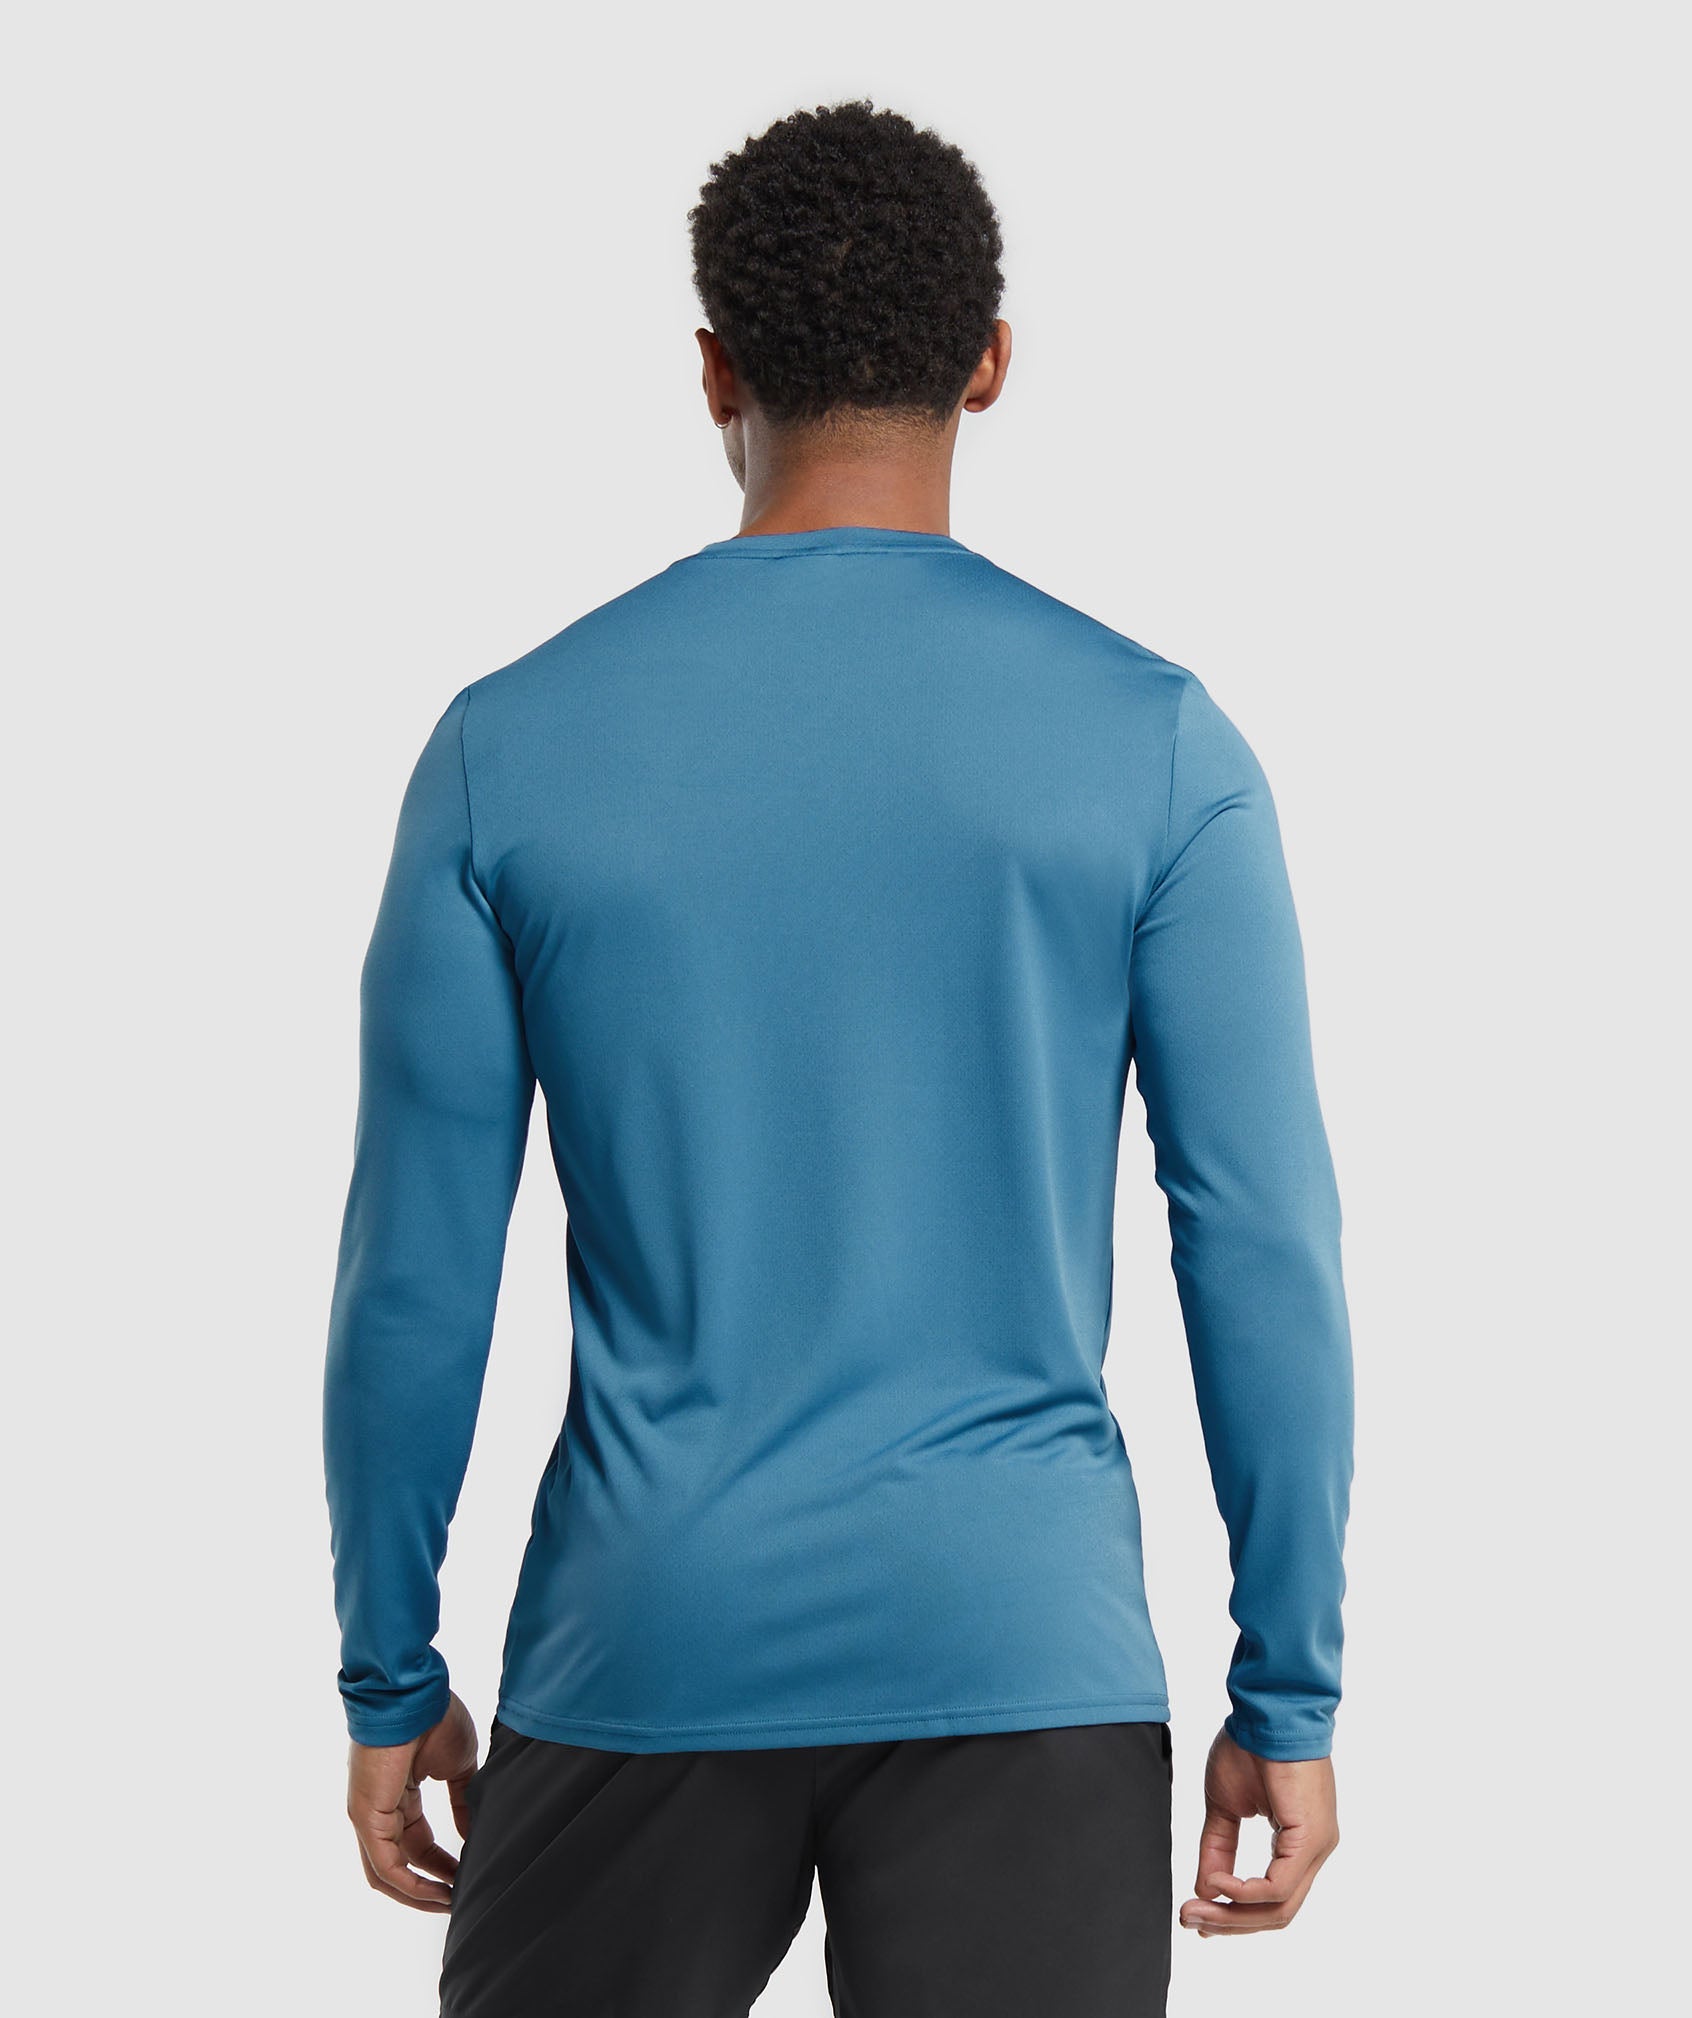 Arrival Long Sleeve T-Shirt in Utility Blue - view 2